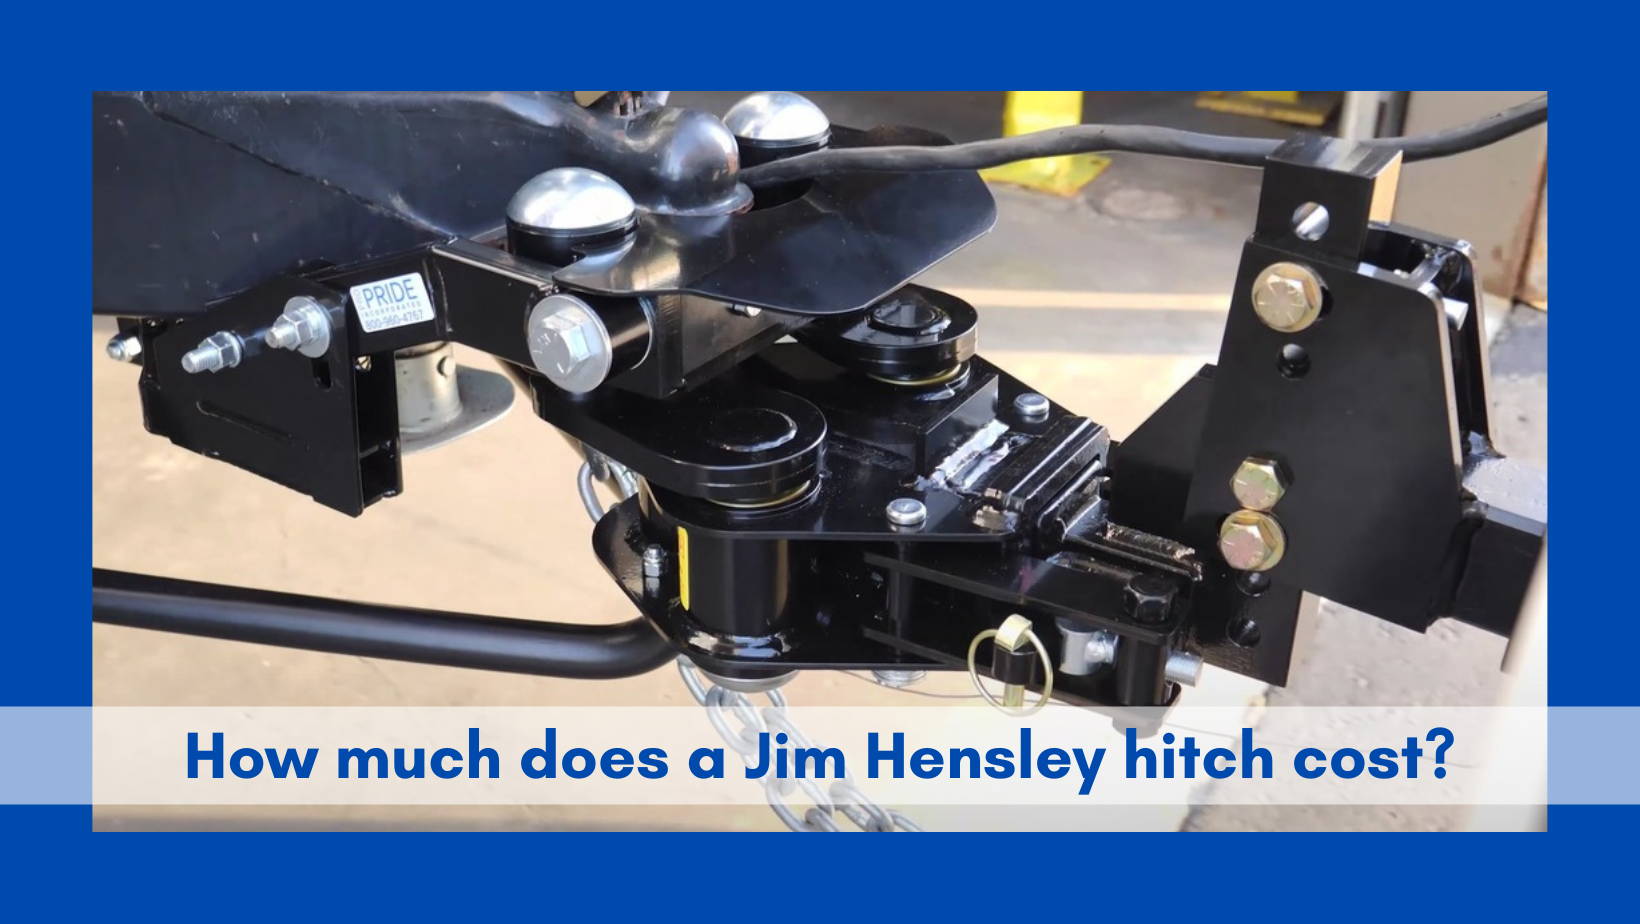 The cost of a Jim Hensley Hitch